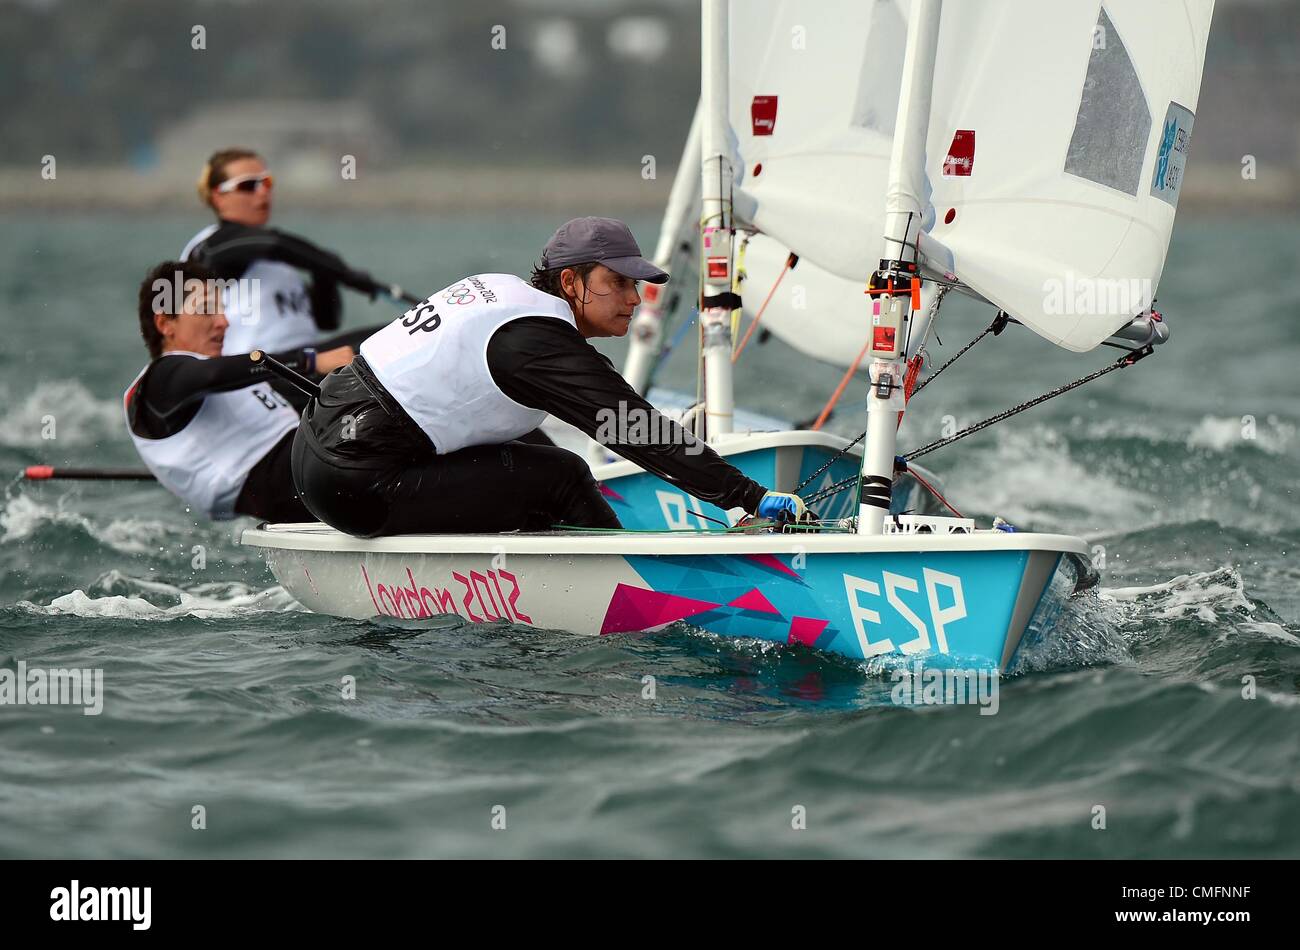 Olympic Sailing, action during the London 2012 Olympic Games at the Weymouth & Portland Venue, Dorset, Britain, UK.  Alicia Cebrian Martinez De Lagos of Spain in the Women's Laser Radial class August 03rd, 2012 PICTURE: DORSET MEDIA SERVICE Stock Photo